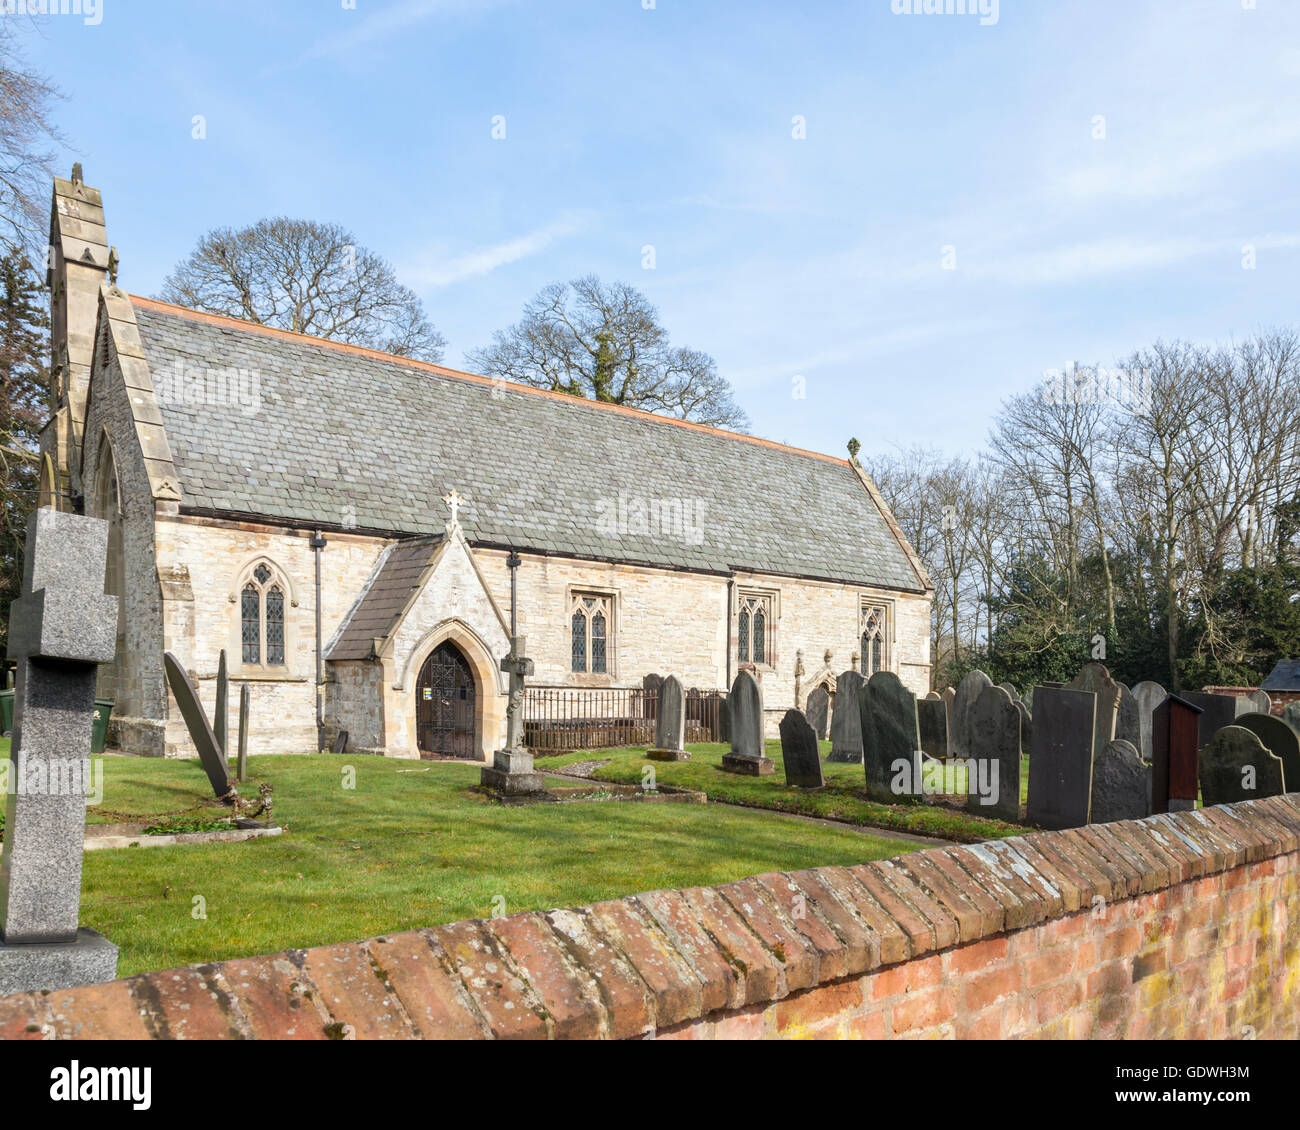 St Giles' Church at Costock, a Grade II listed medieval church of special architectural and historic interest, Nottinghamshire, England, UK Stock Photo